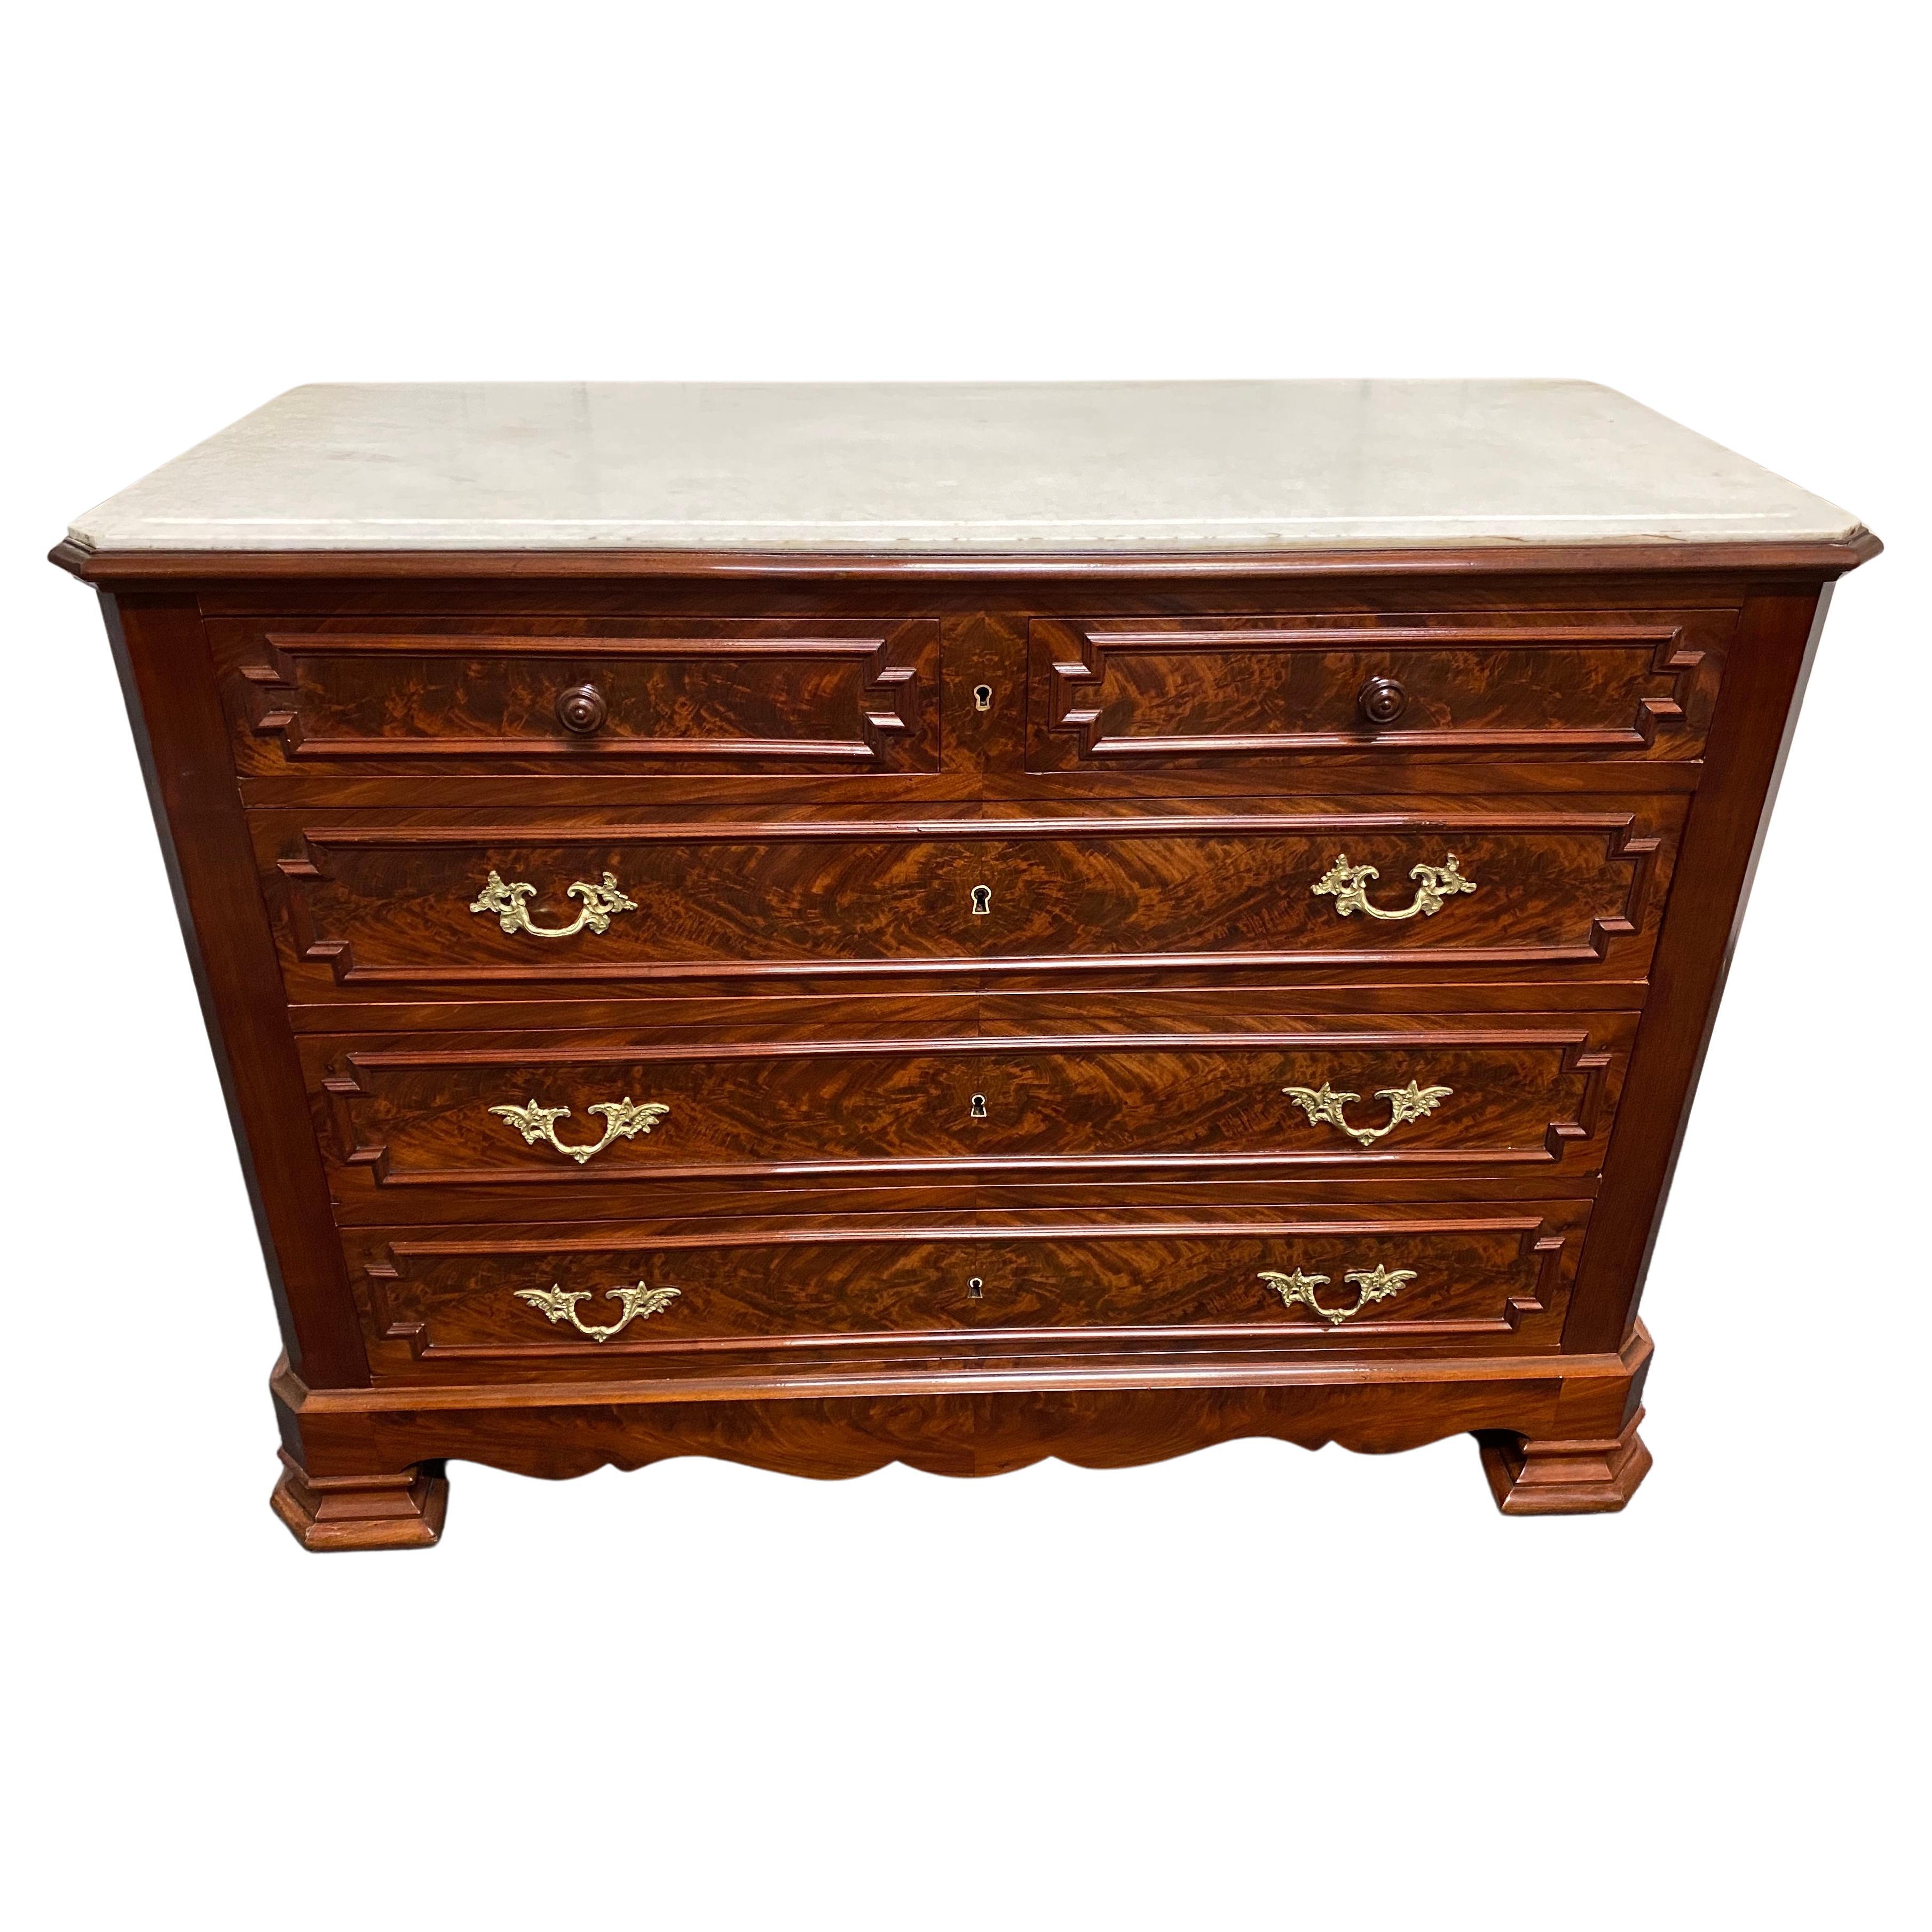 Good Quality French Marble Top Commode Chest of Drawers